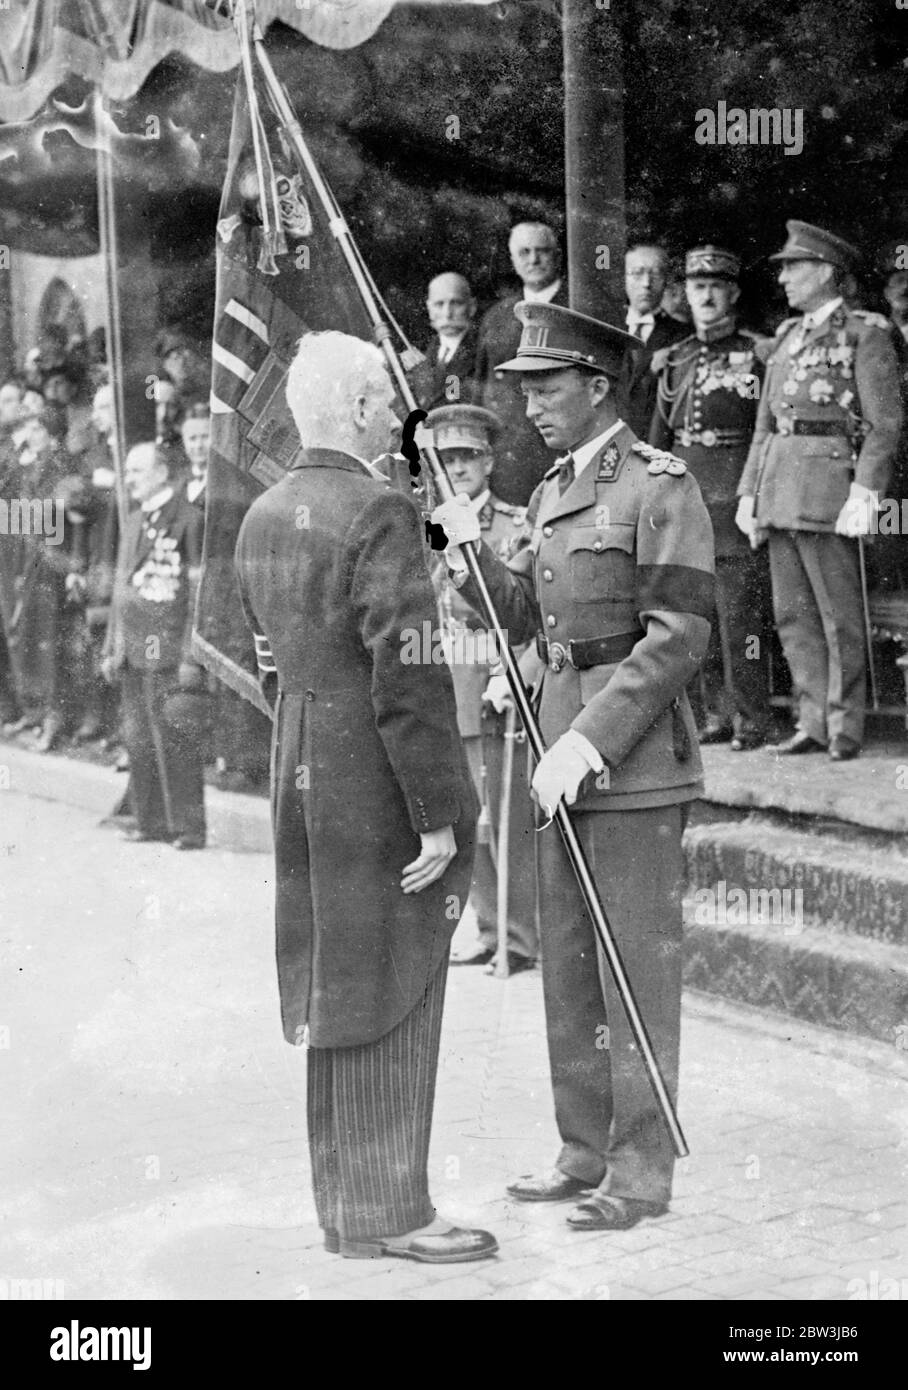 King of the Belgians presents new standard to ex servicemen in Brussels . King Leopold of the Belgians presented a new standard to the Croix de Feu , an ex servicemen ' s orginisation at the Grand Place in Brussels . Photo shows , King Leopold presenting the standard . 11 May 1936 Stock Photo